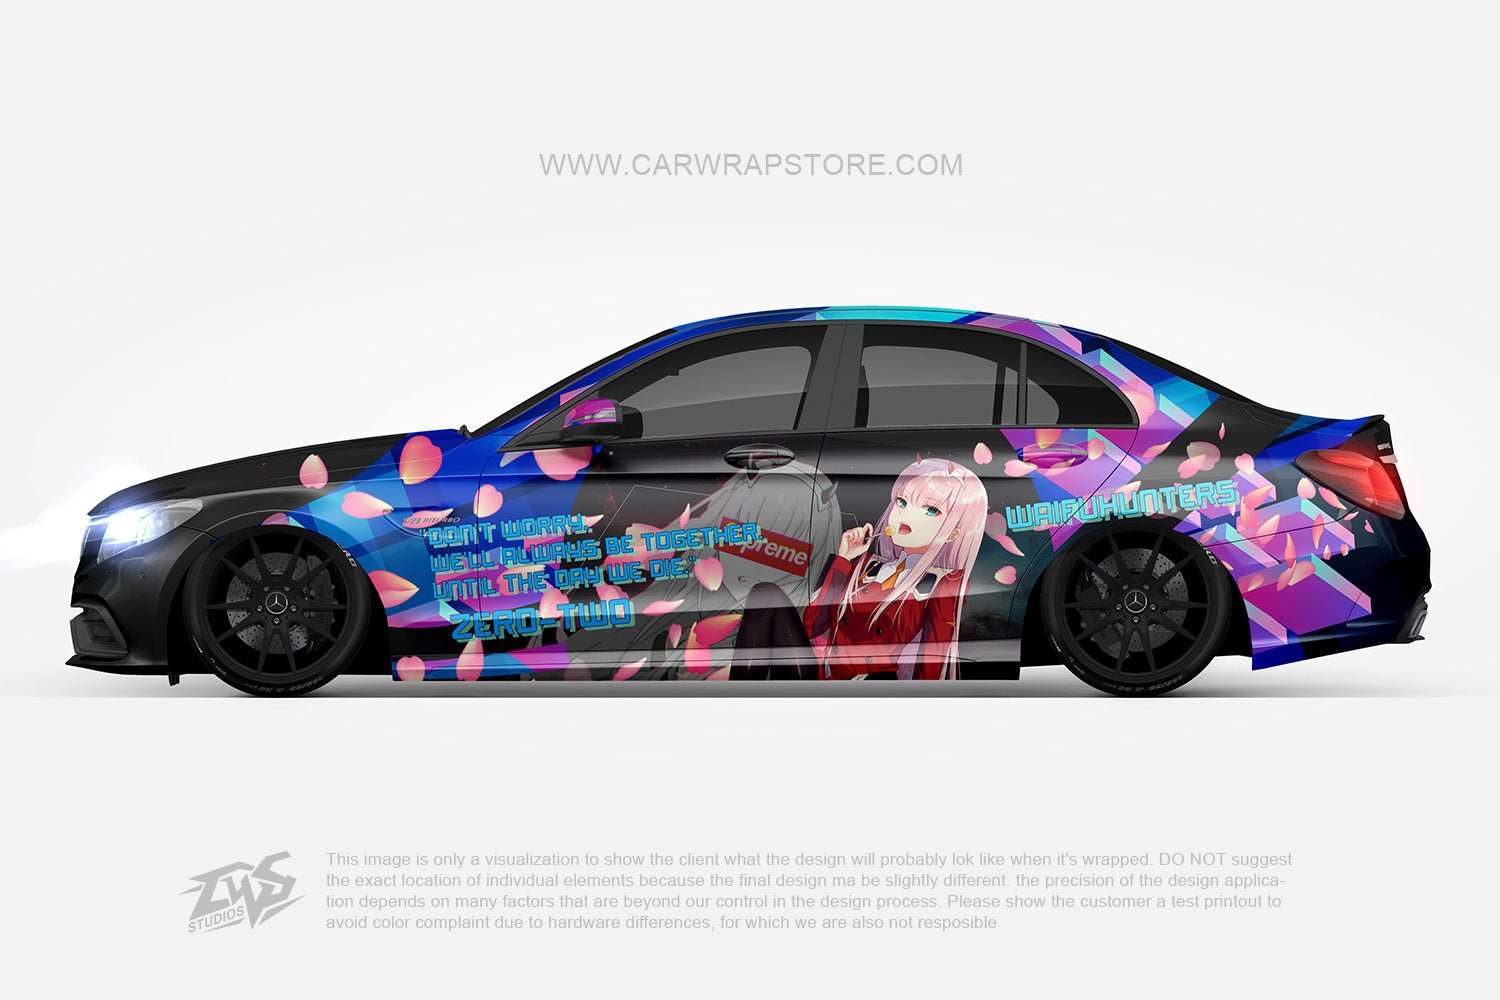 Zero Two DARLING in the FRANXX【002-07】 - Car Wrap Store